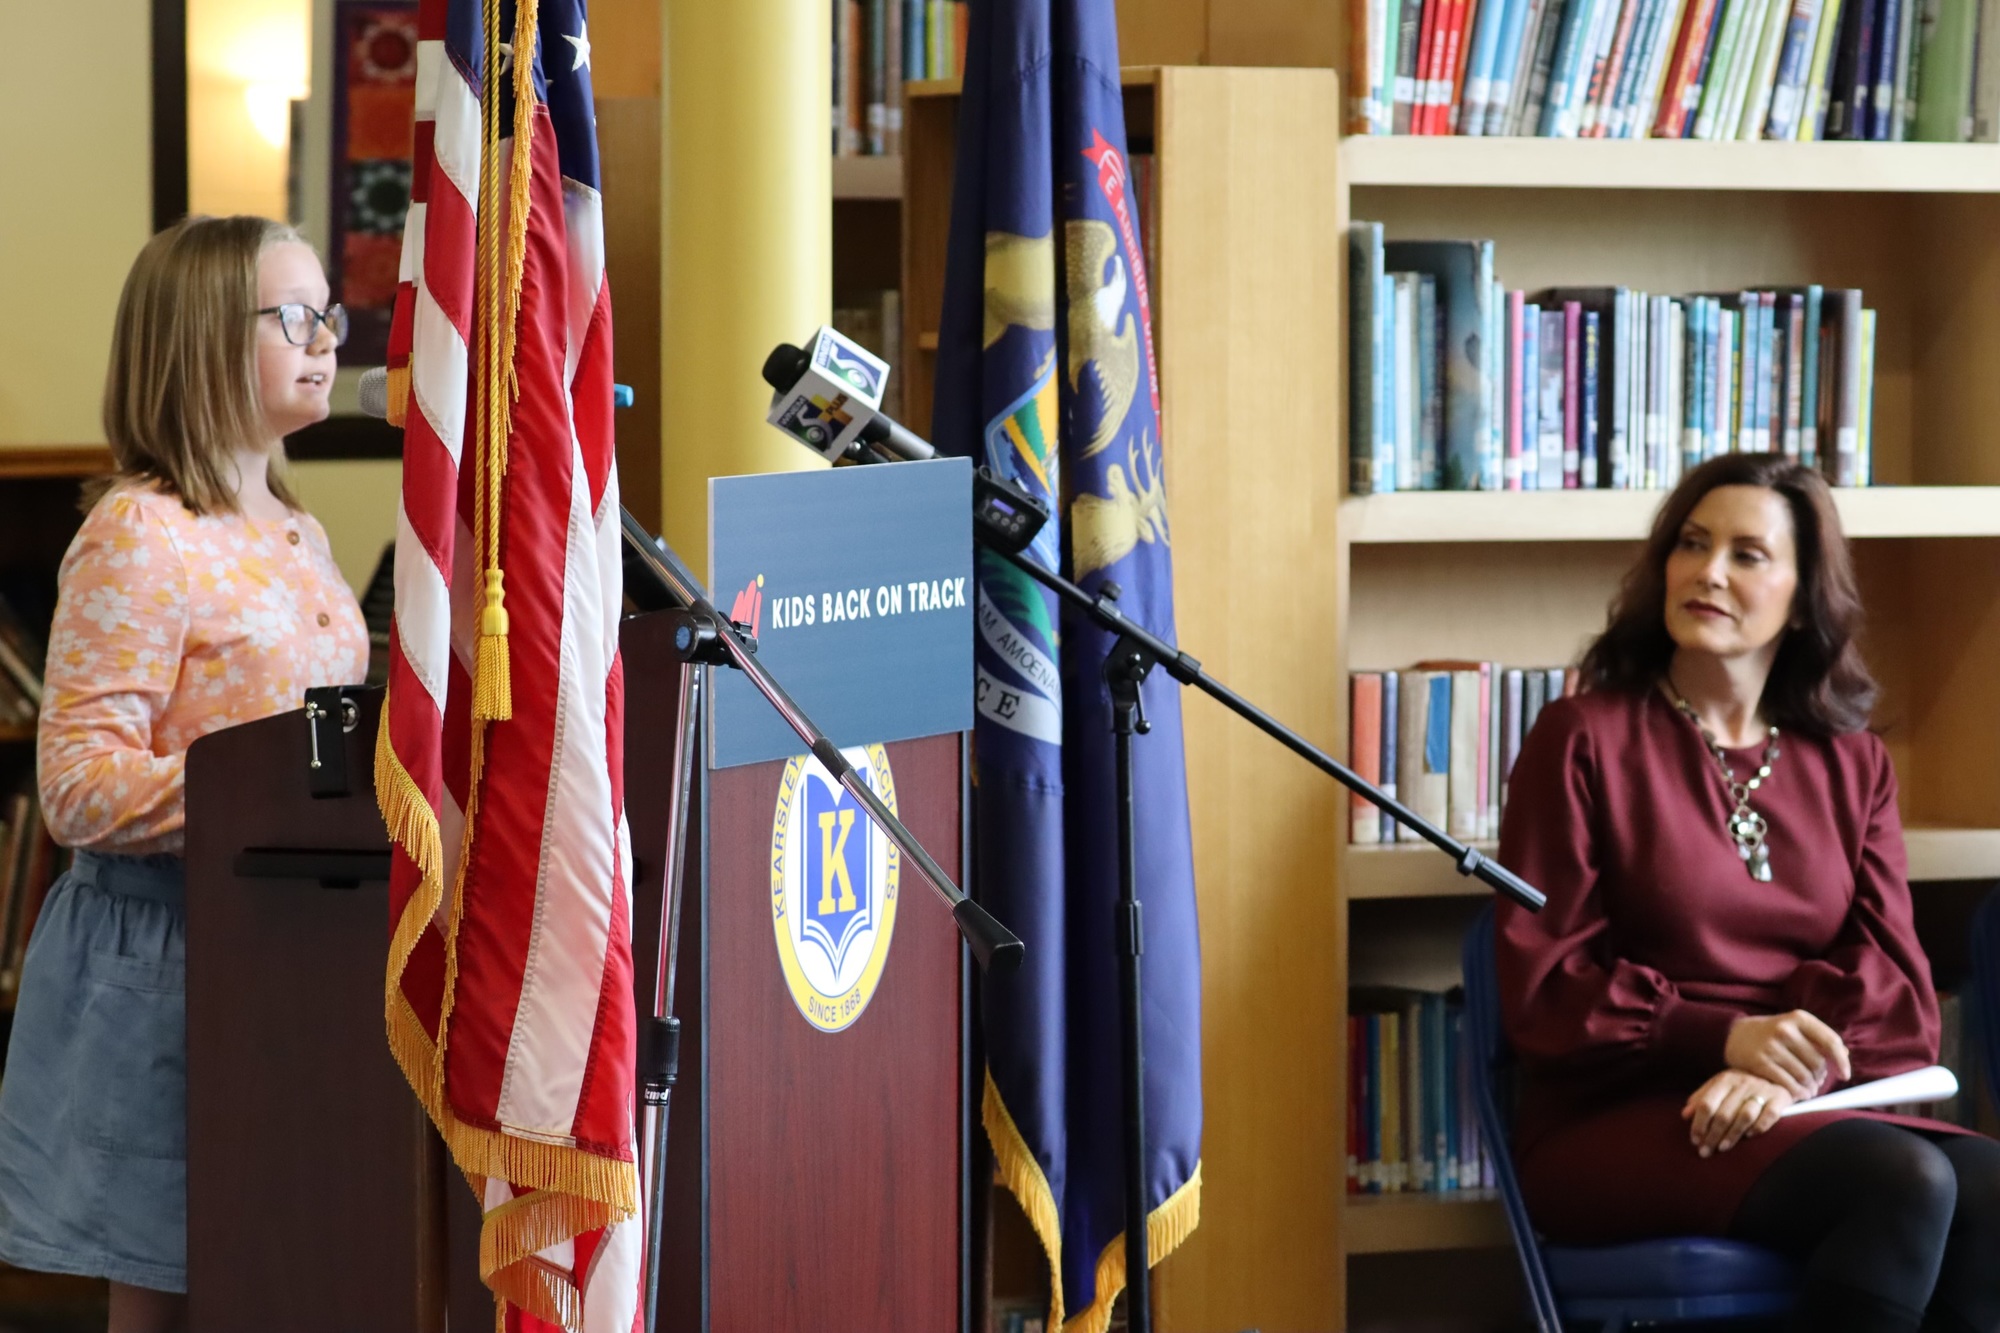 Governor Whitmer listens from a stage as a student named Caroline at an event announcing the Mi Kids Back on Track plan.